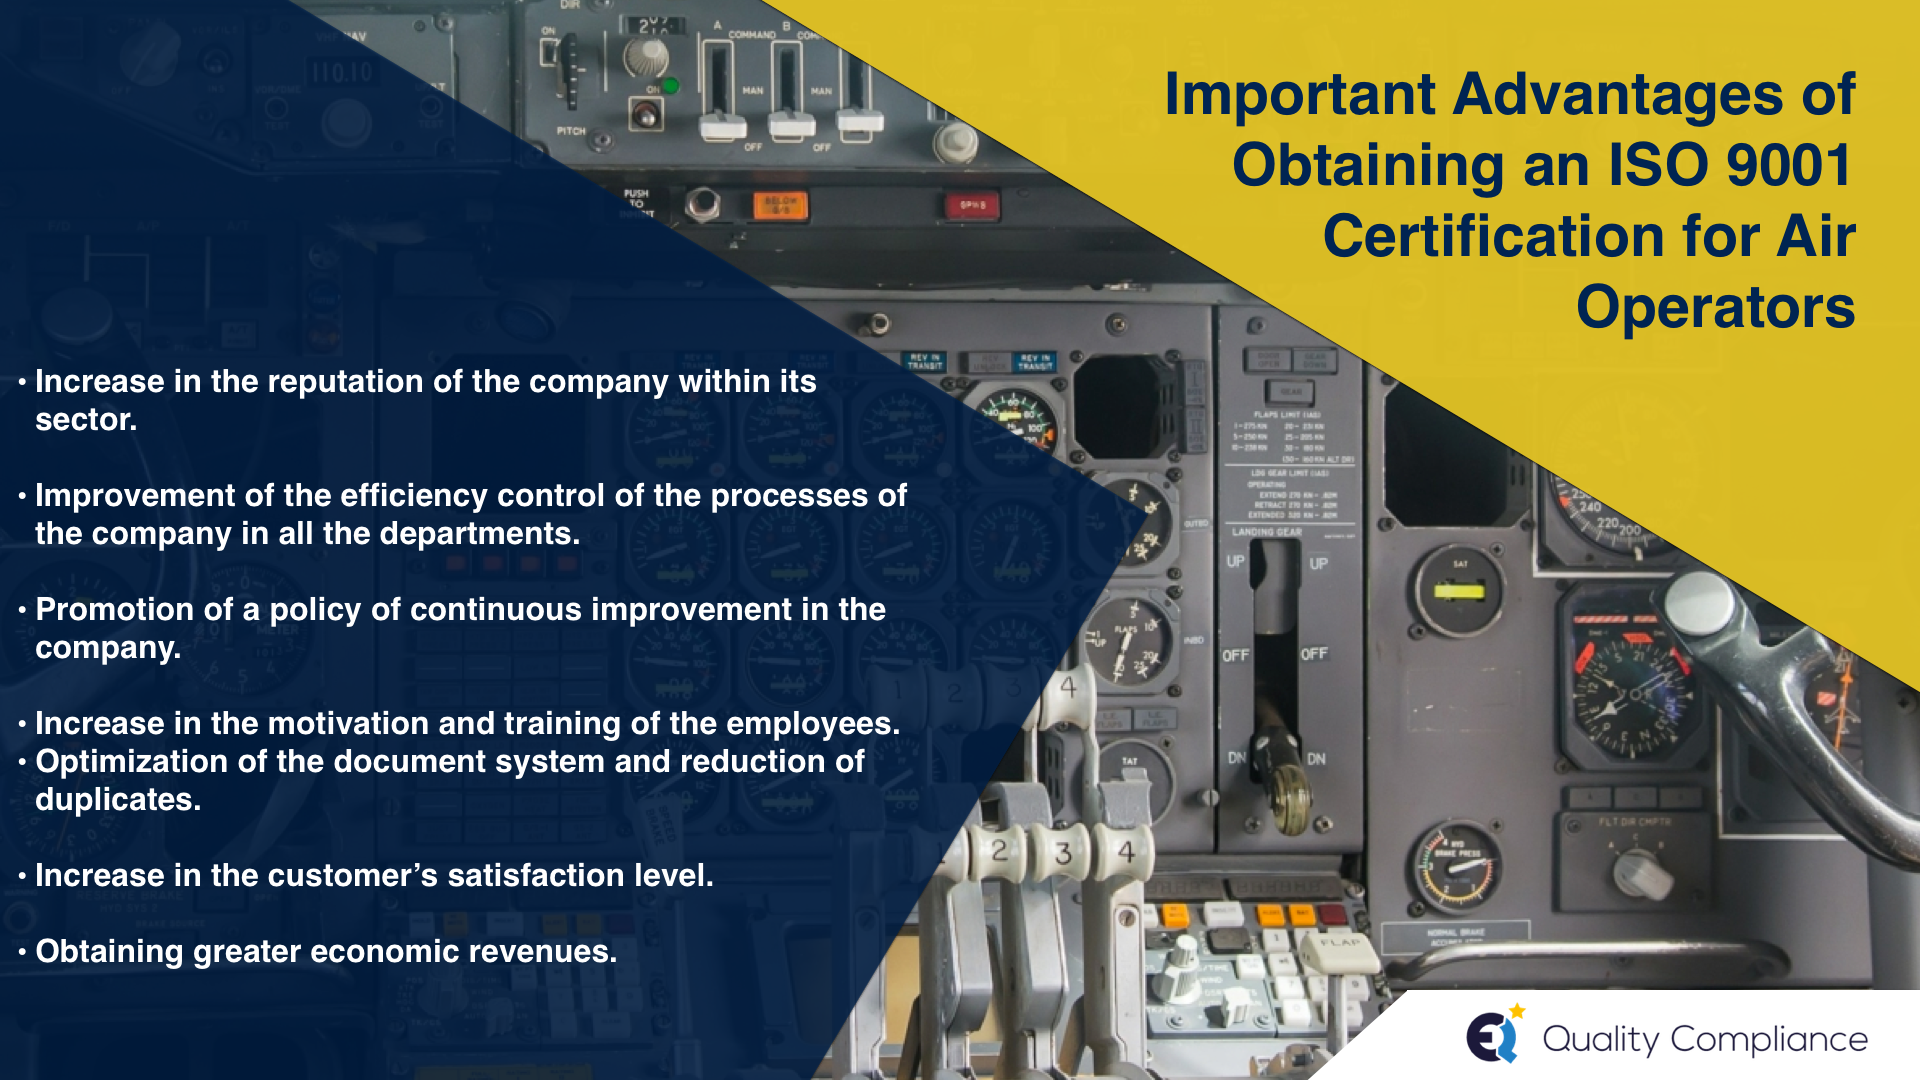 ISO 9001 certification for Air Operators